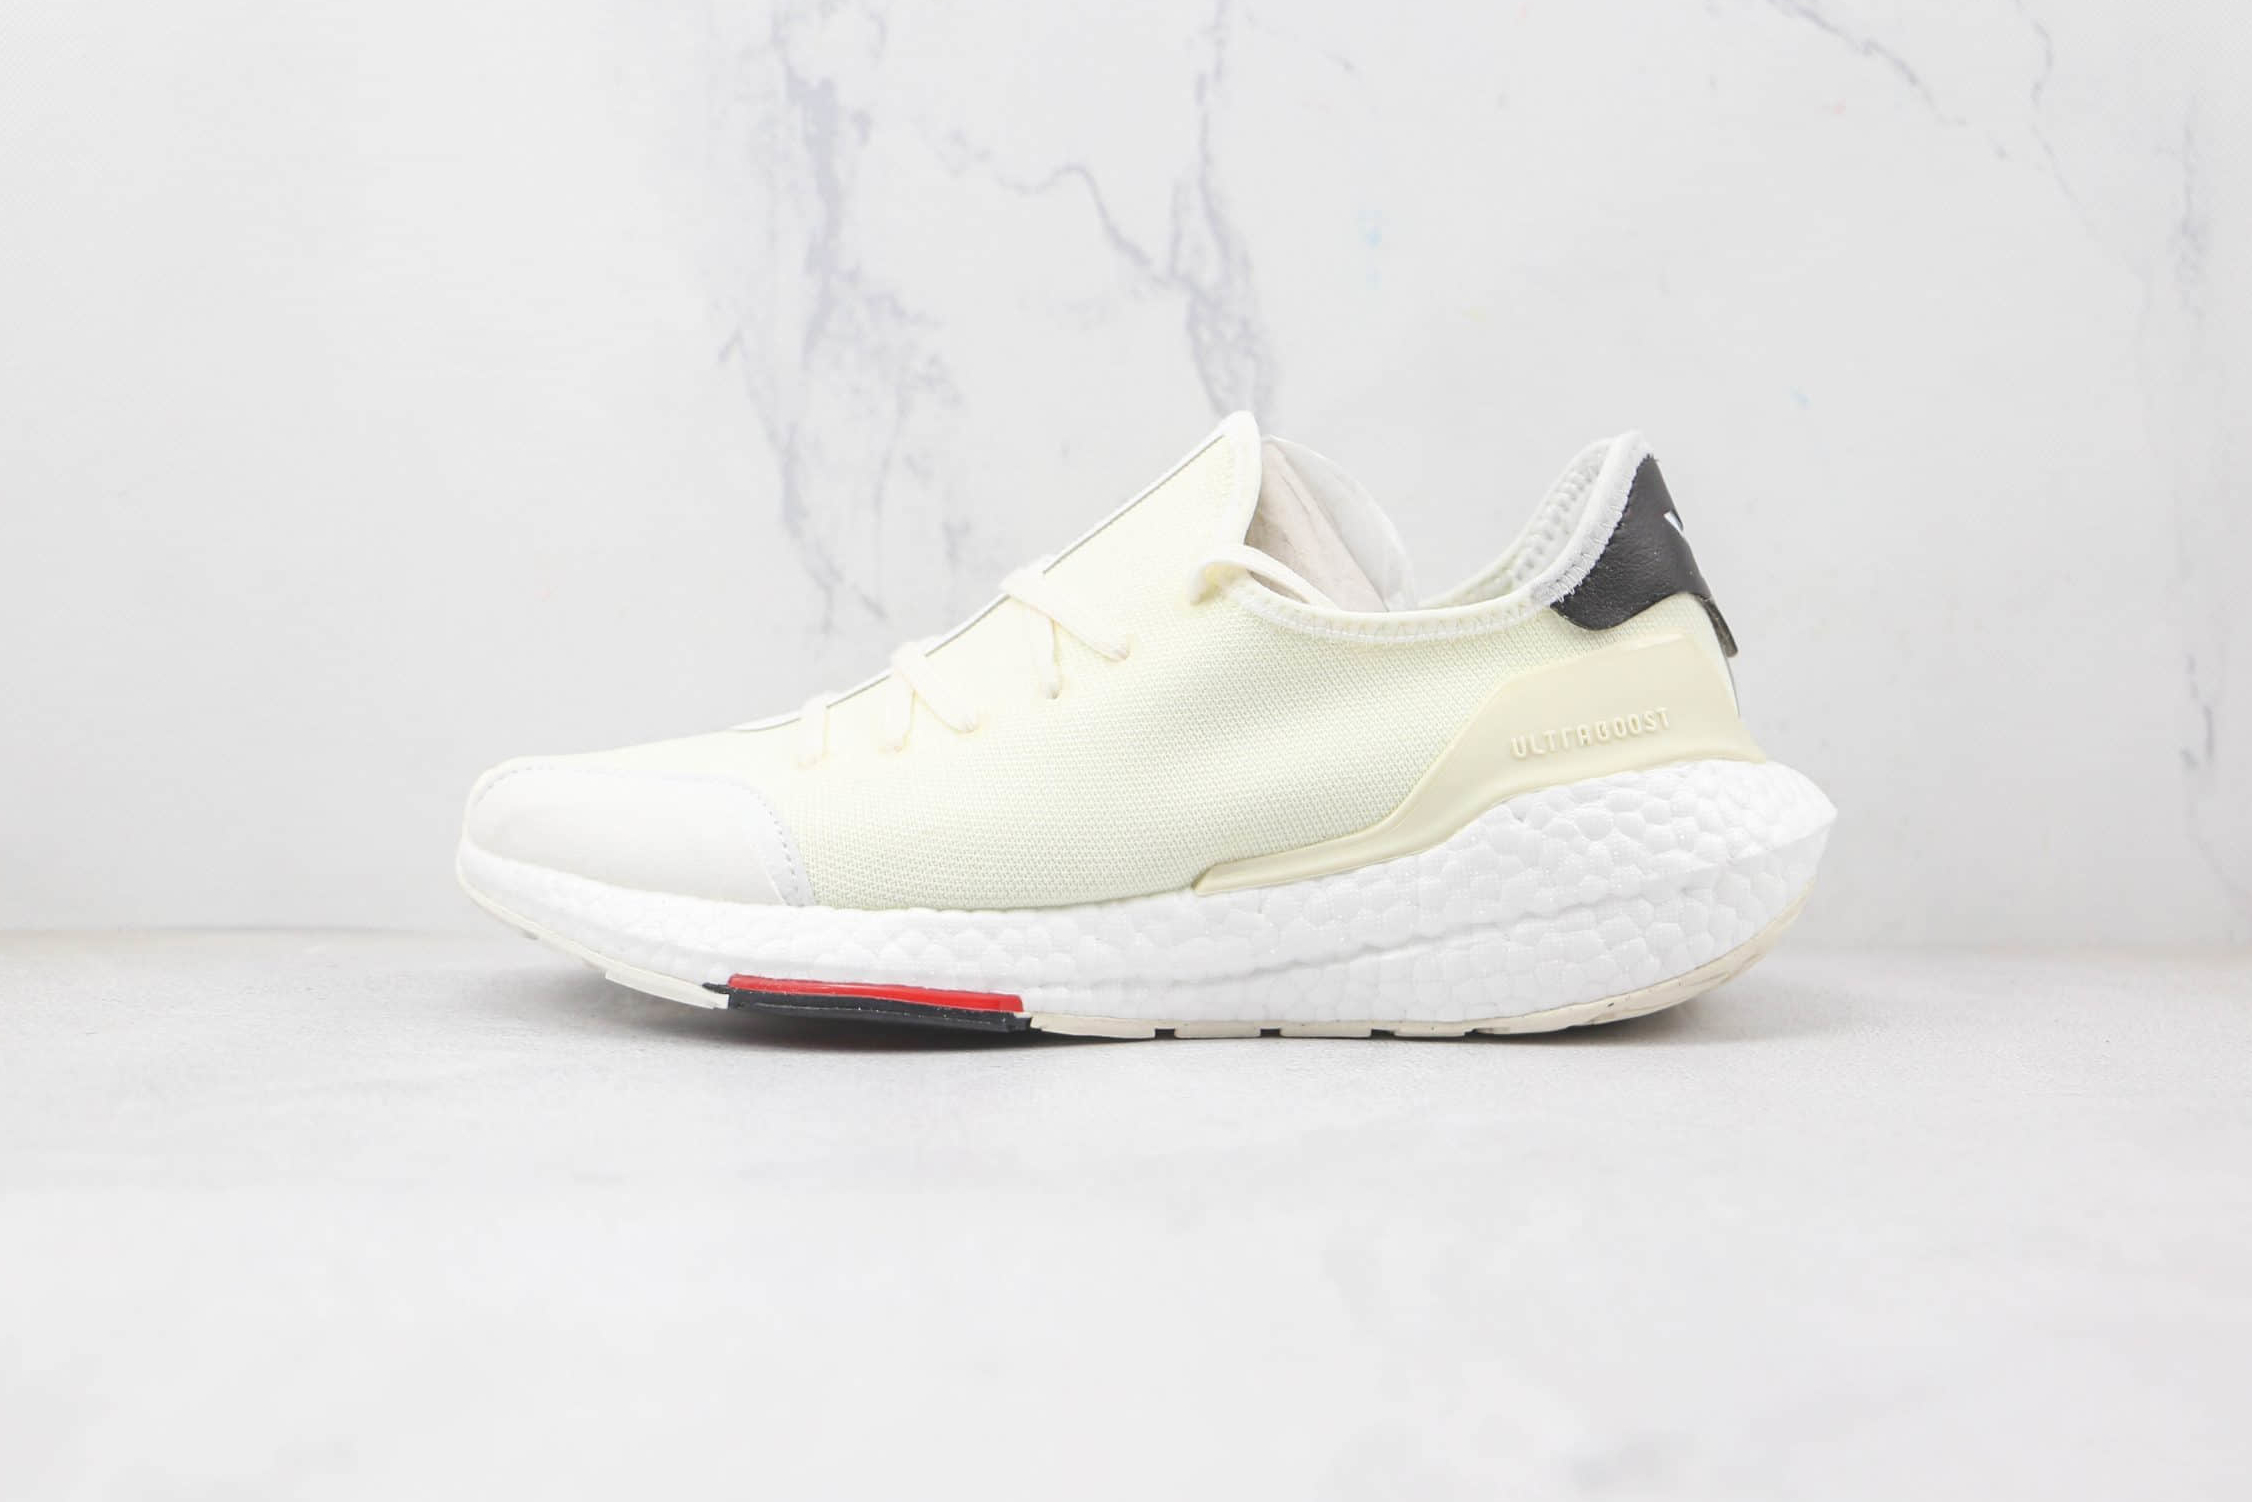 Adidas Y-3 Ultra Boost 21 White H67477 | Non-Slip Breathable Low Tops | Unisex Athletic Shoes